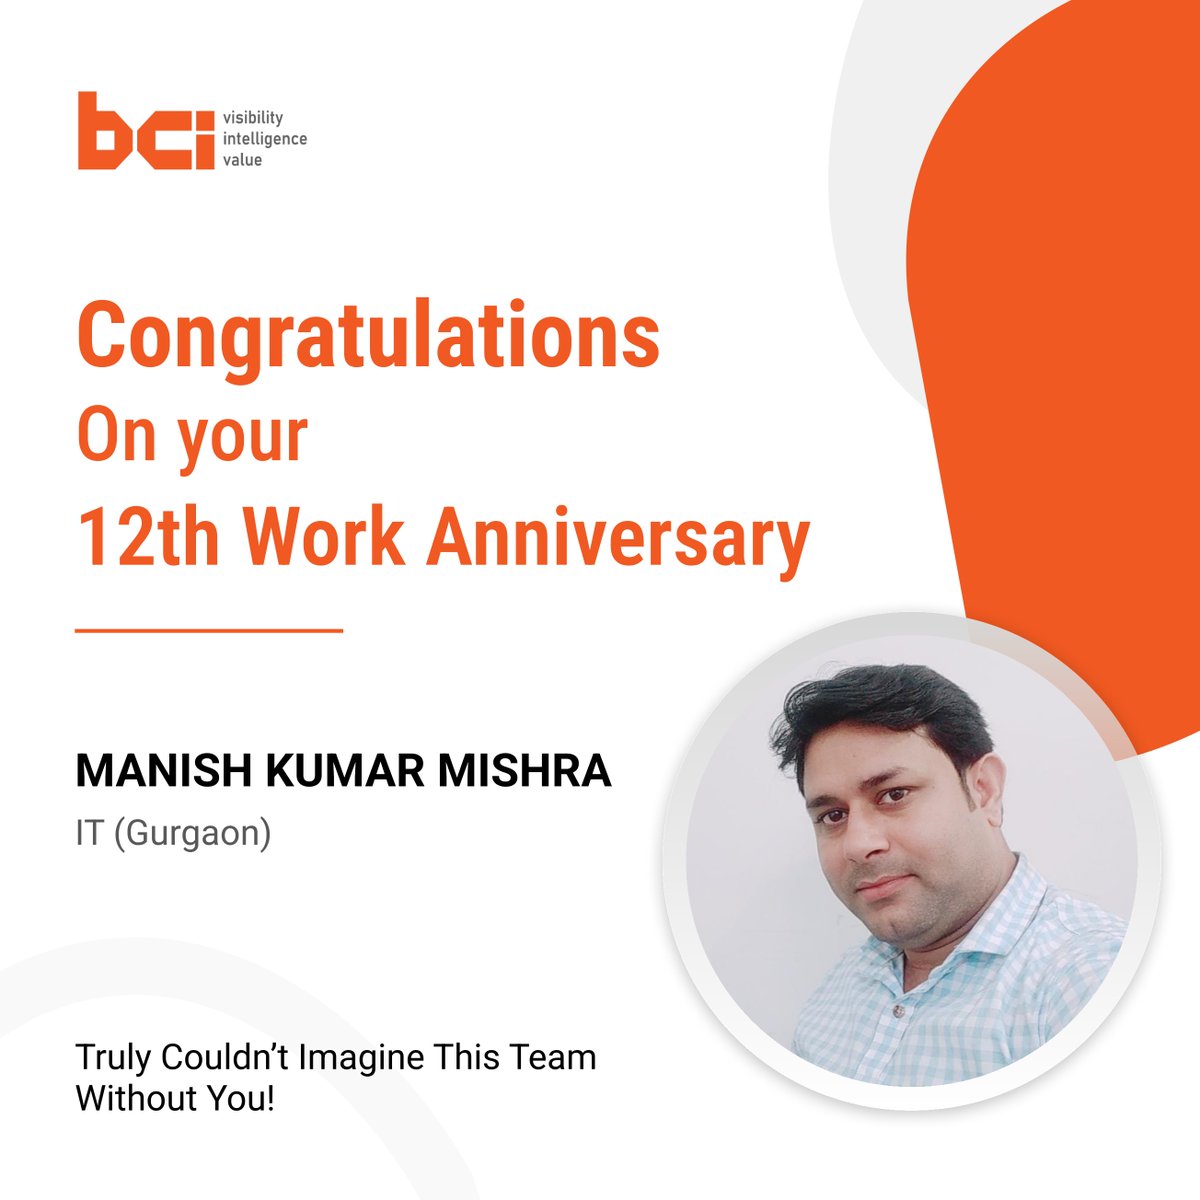 Cheers to Manish Mishra on 12 years of dedication and excellence!
We are proud to have you as a part of our work family. 👏🎉
#barcodeindia #bci #workanniversary #workanniversarycelebration #congratulations #grateful #team #workfam #ThankYou